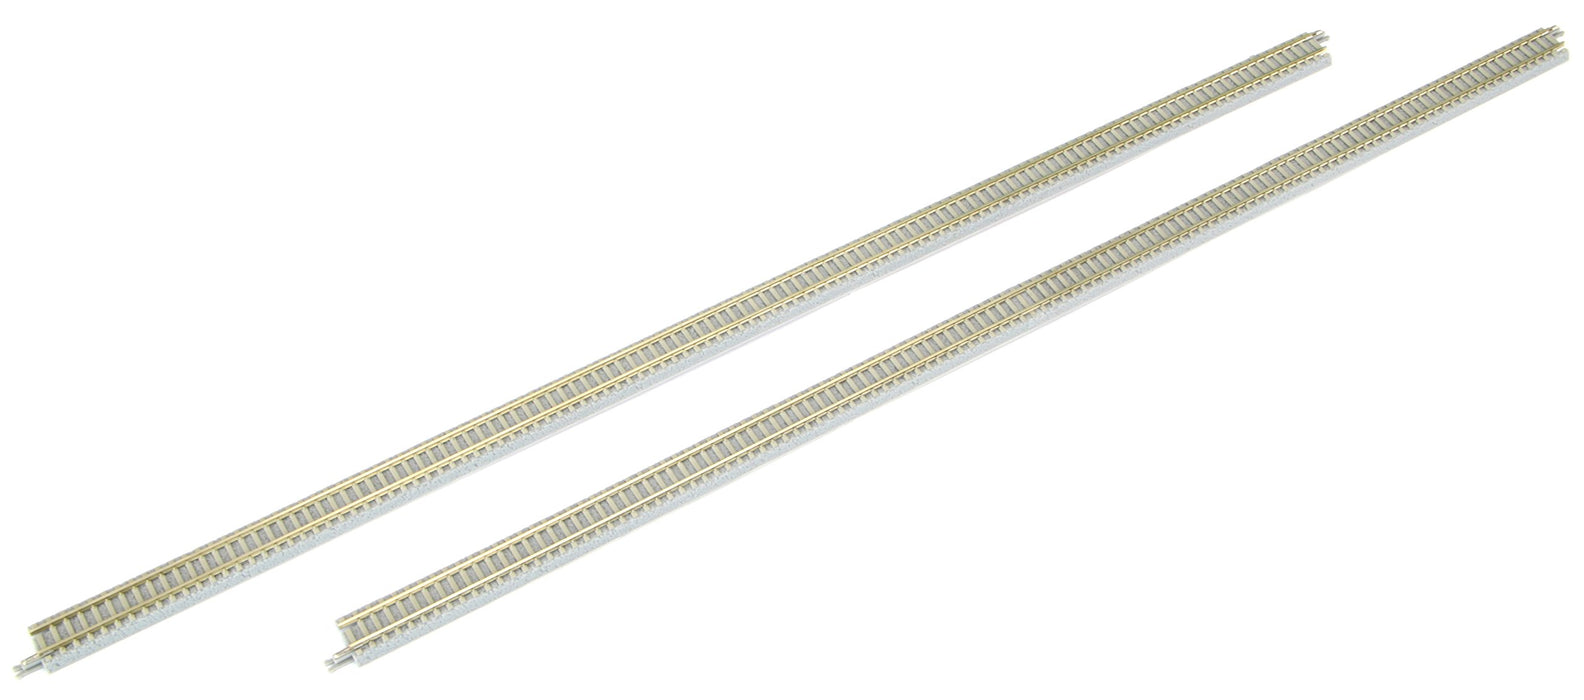 Rokuhan Z Gauge 440mm Straight Rail Track - Set of 2 Pieces